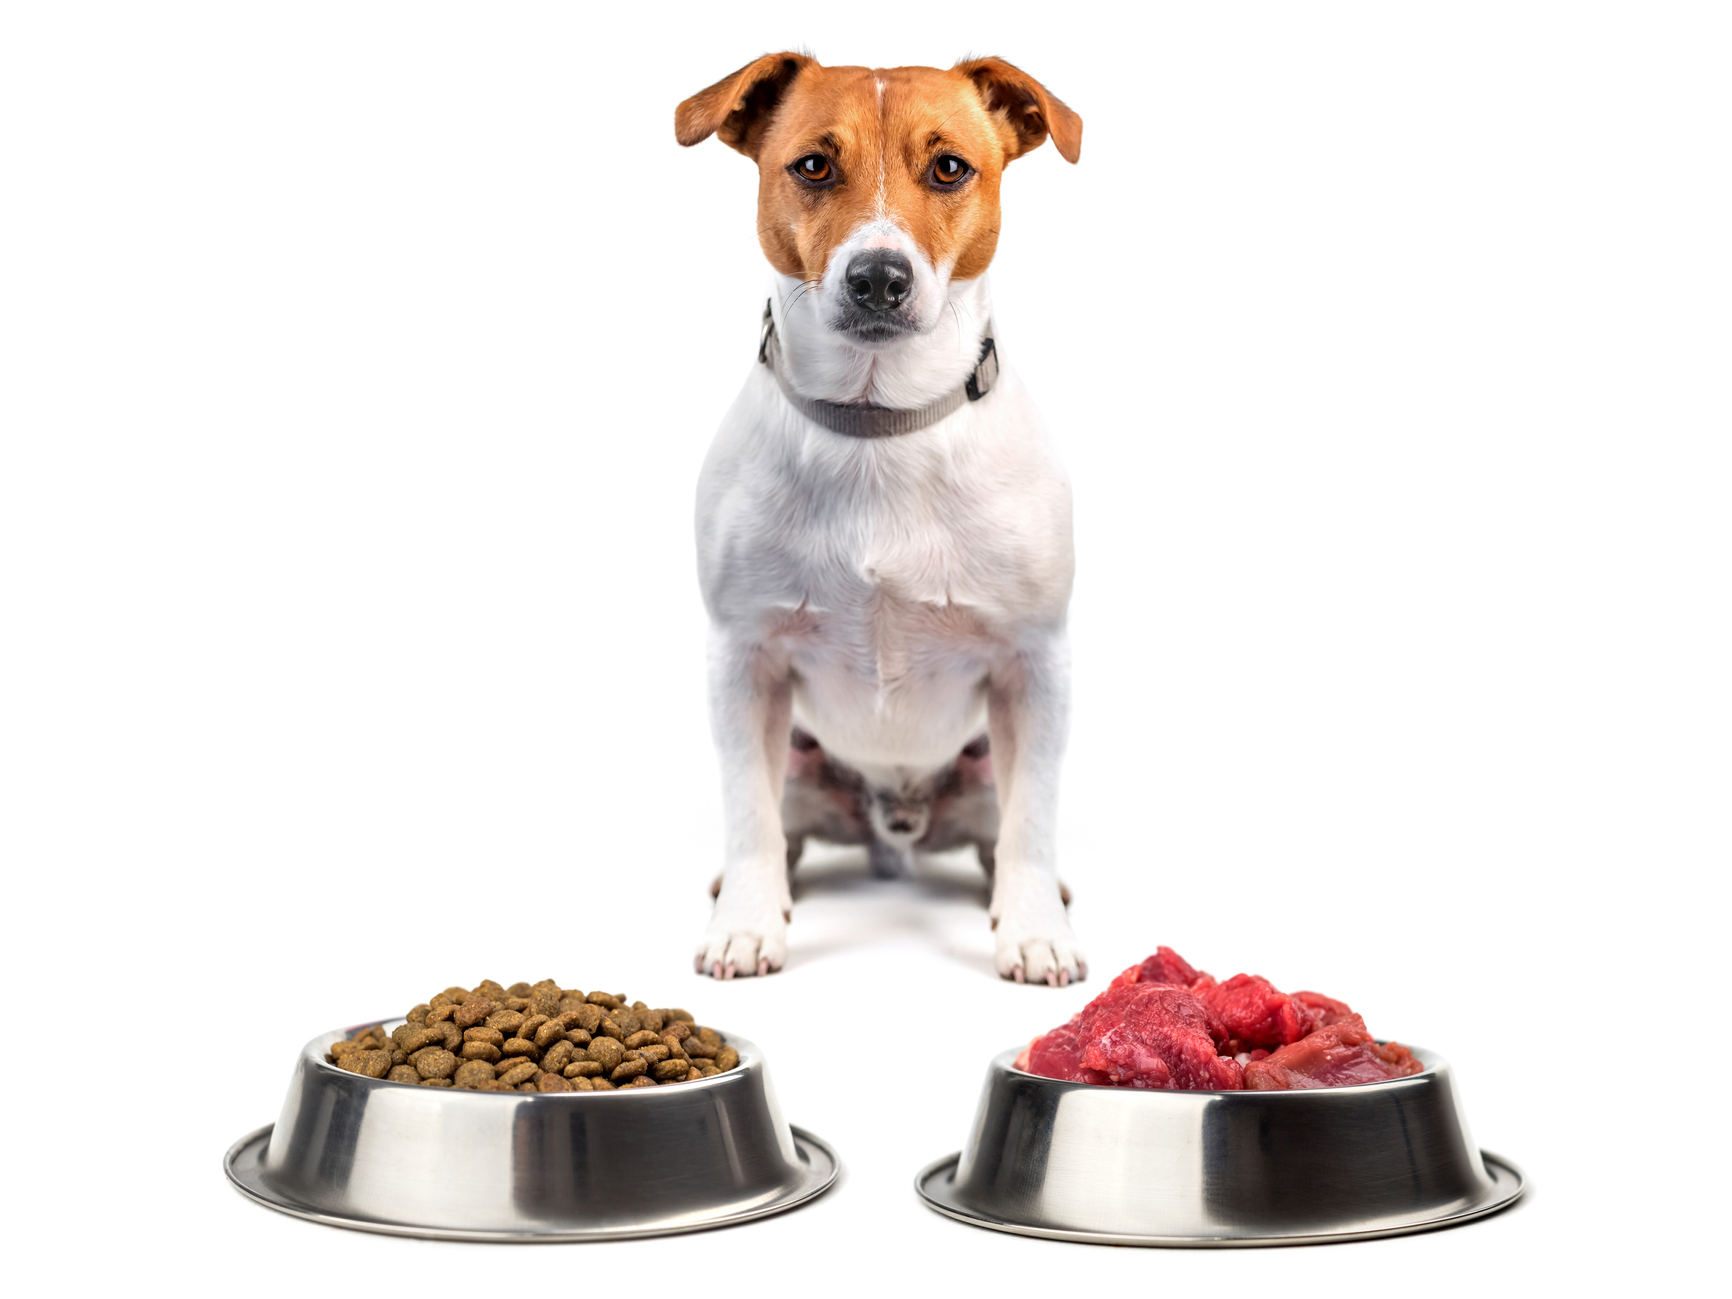 The pet food trend helping to spread antibiotic-resistant bacteria